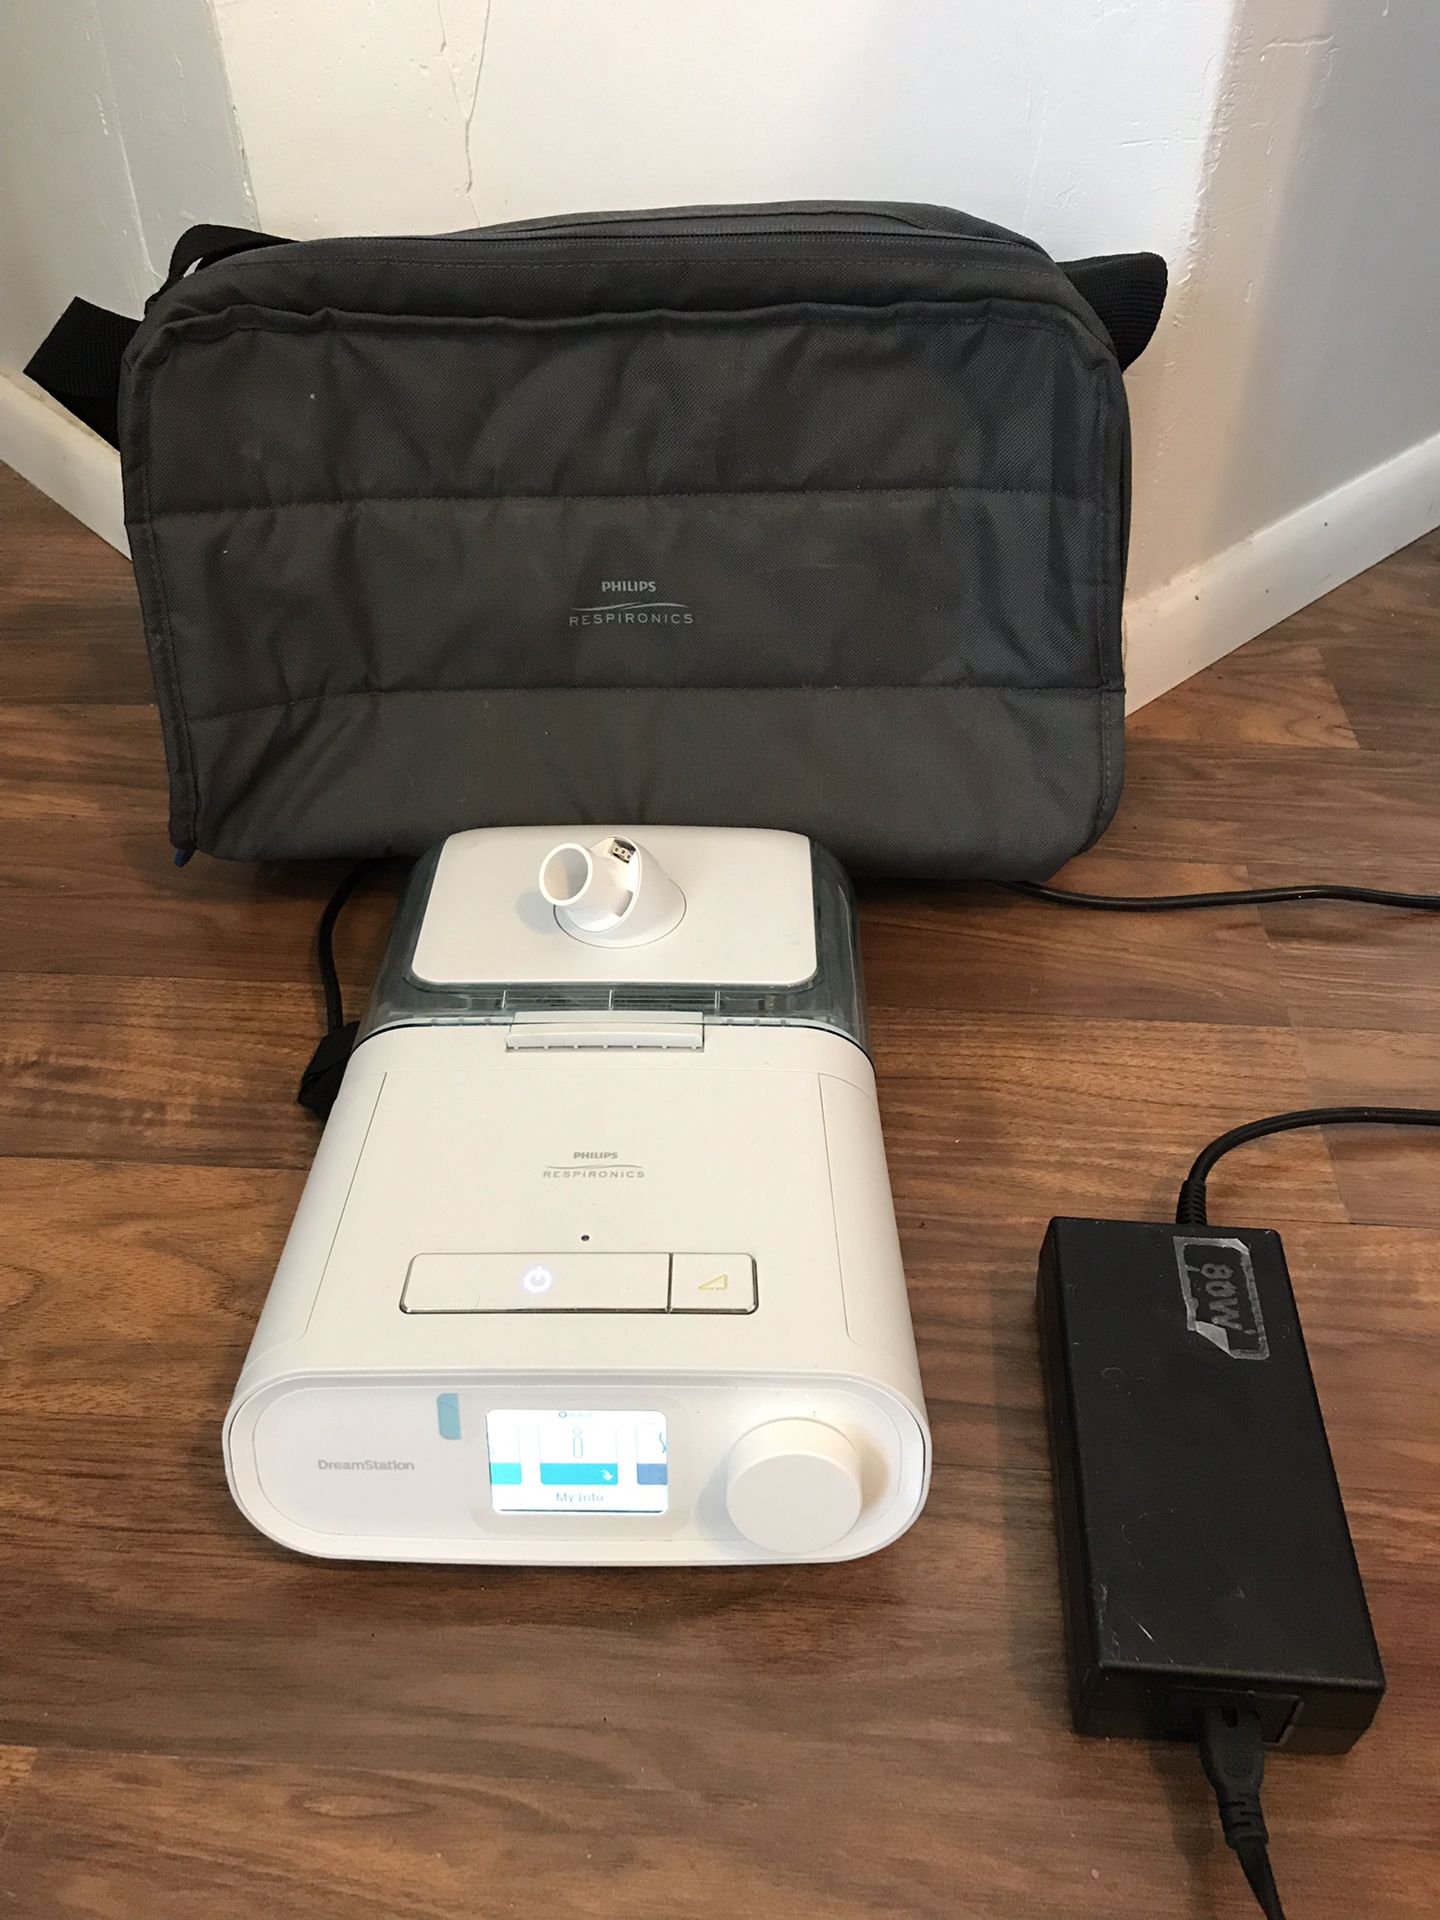 Respironics Dreamstation Auto BiPAP Cpap Machine with humidifier